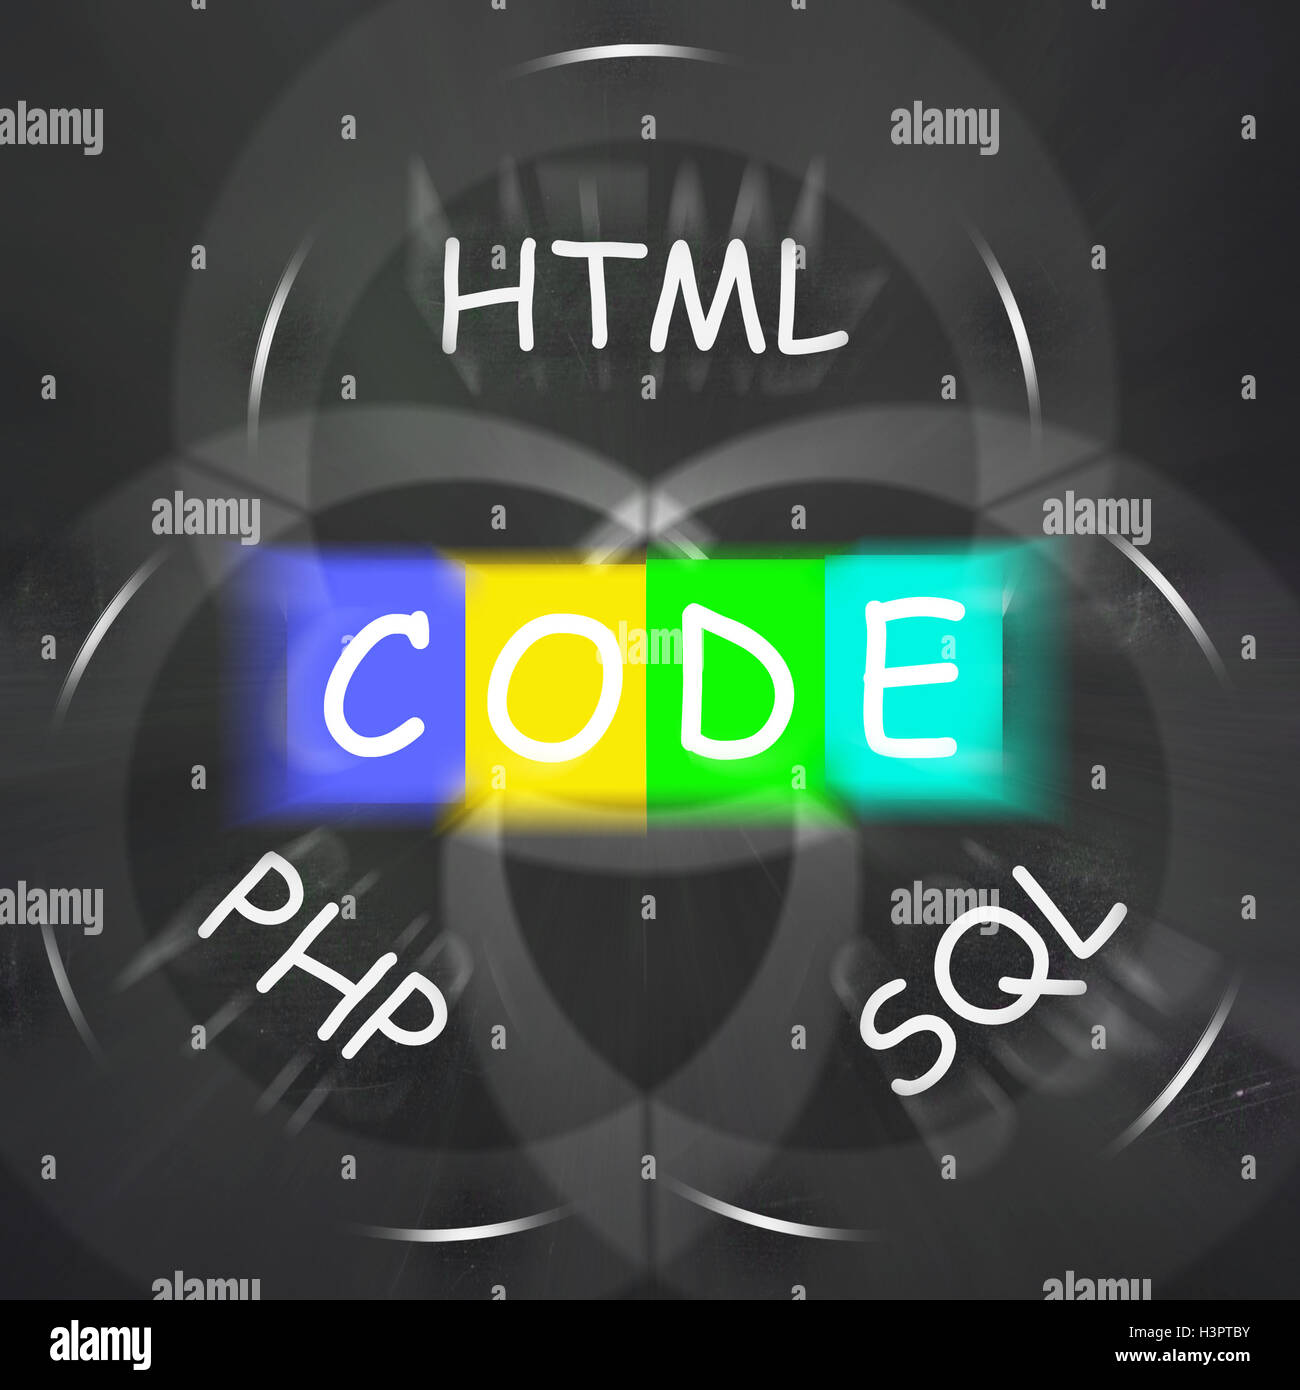 Words Displays Code HTML PHP and SQL Stock Photo